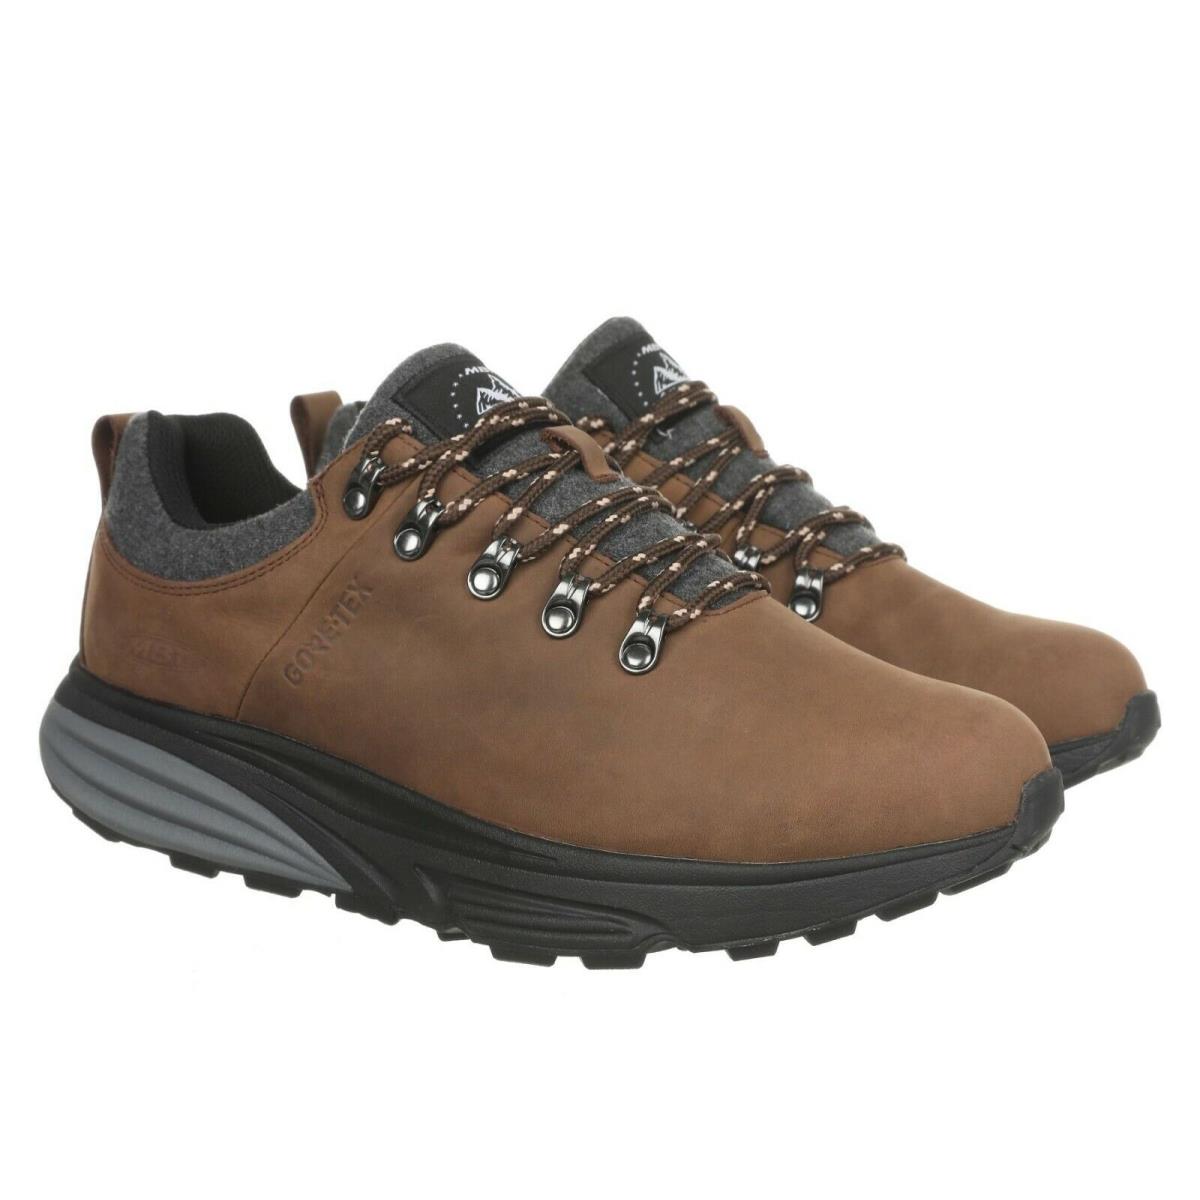 MBT shoes ALPINE - CHOCOLATE BROWN-GORE-TEX 1